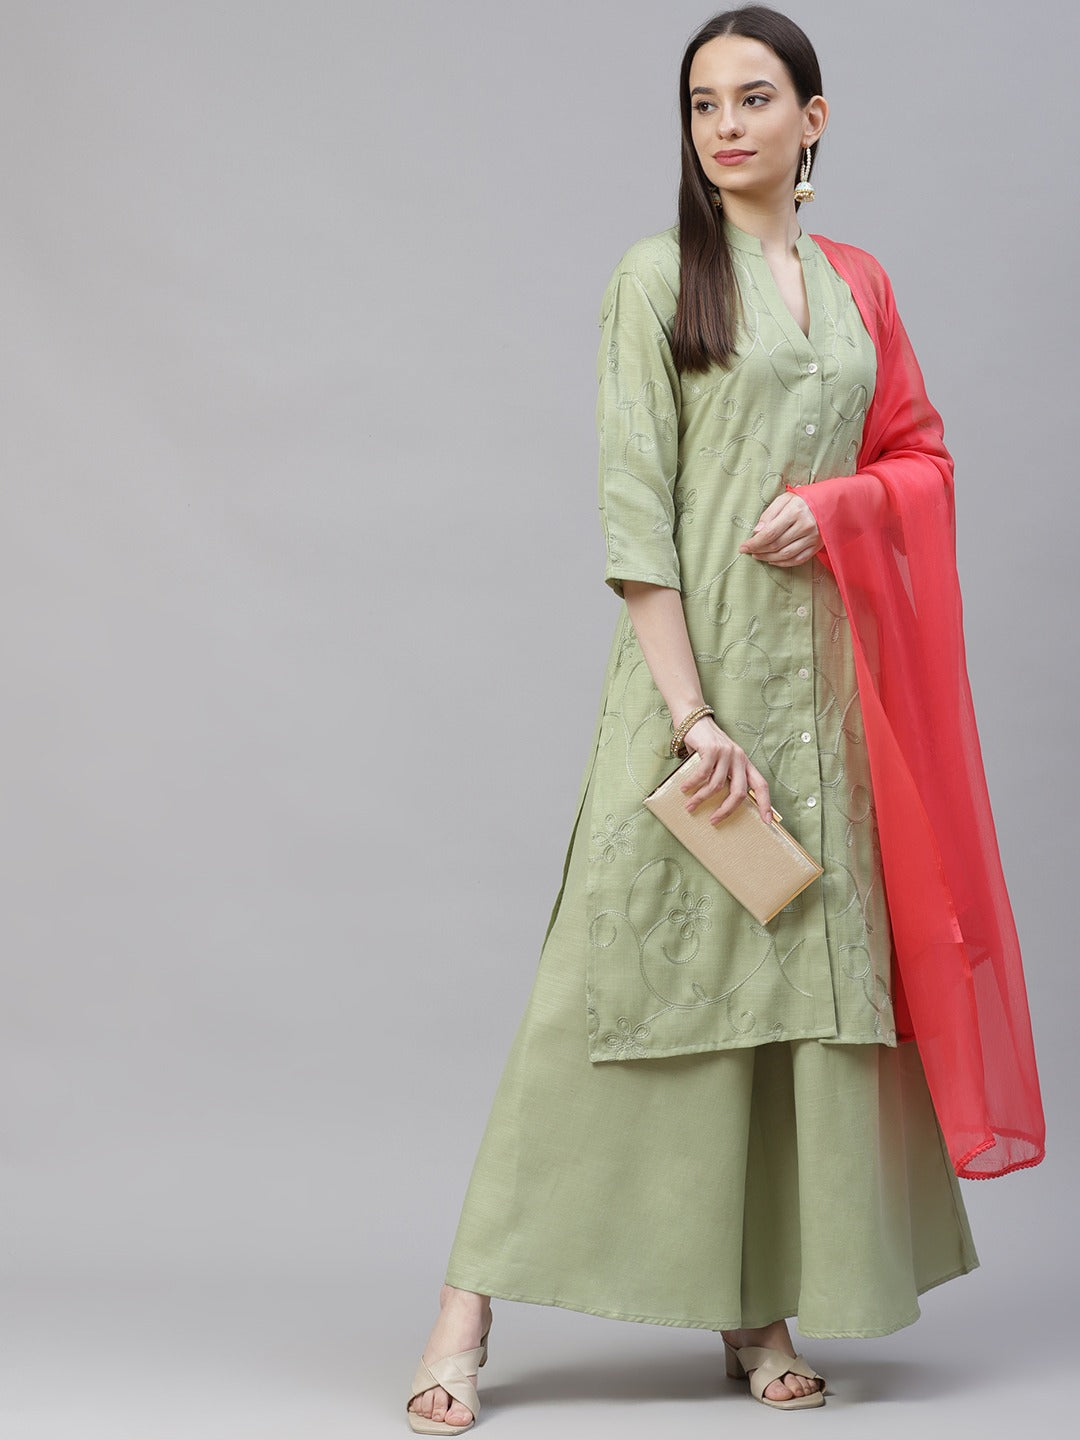 Women's Lime Green & Pink Floral Embroidered Kurta with Palazzos & Dupatta ( JOKPL D21P 1399 Lime ) - Jompers